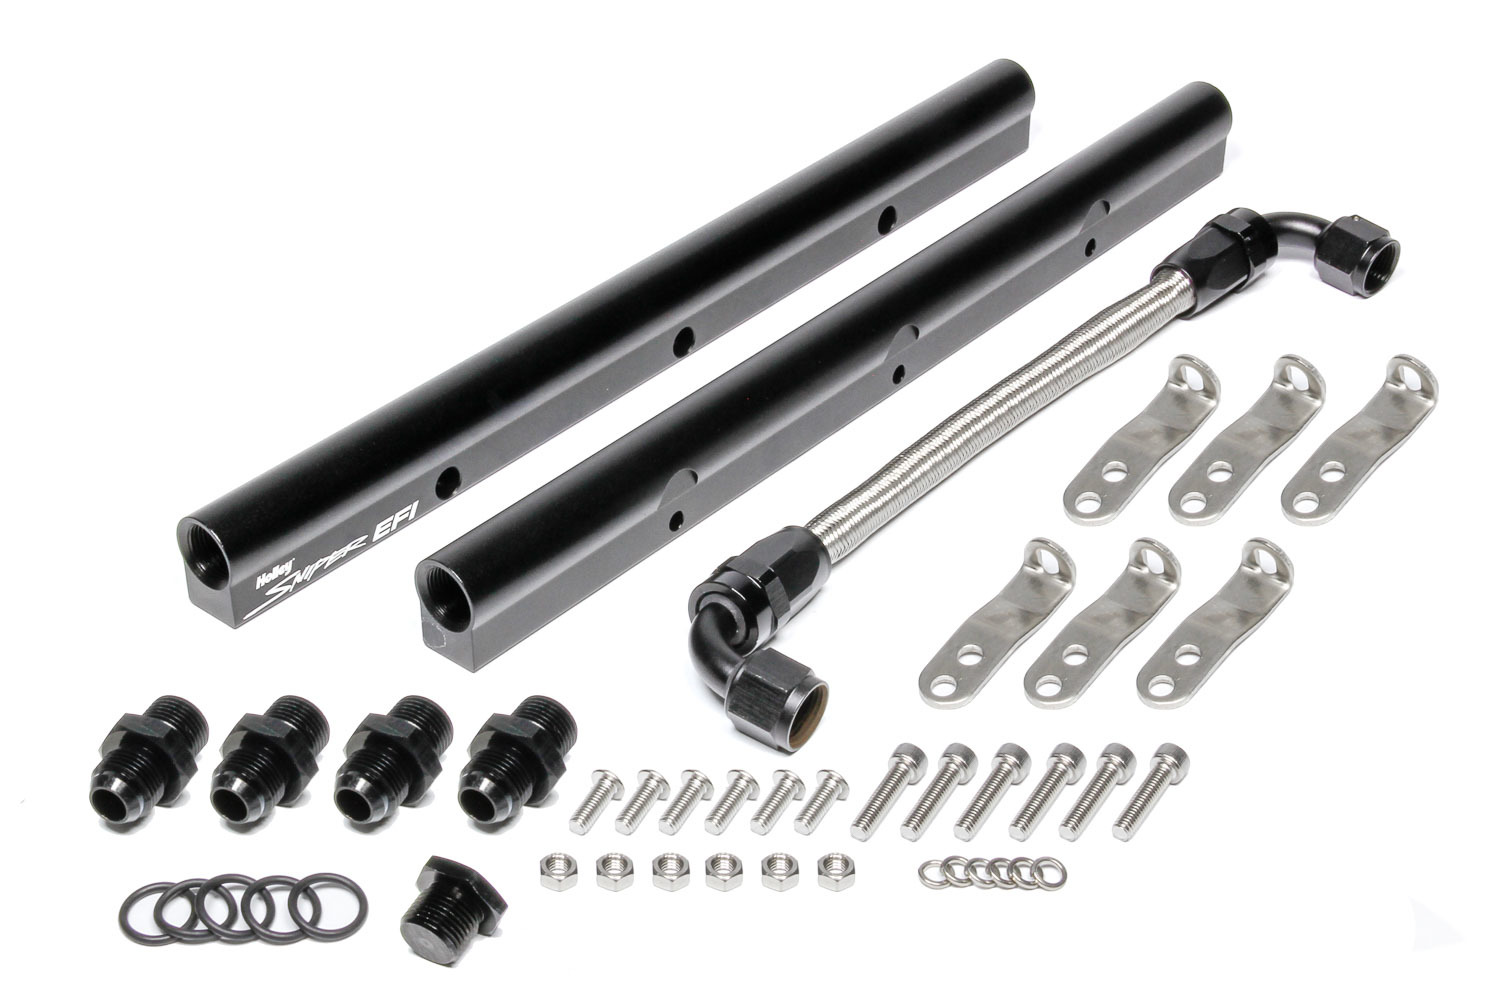 Holley 850001 Fuel Rail, Sniper EFI, 8 AN Female O-Ring Inlets, 8 AN Female O-Ring Outlets, Aluminum, Black Anodized, Hardware Included, Holley LS1 / LS2 / LS6 Intakes, GM LS-Series, Kit